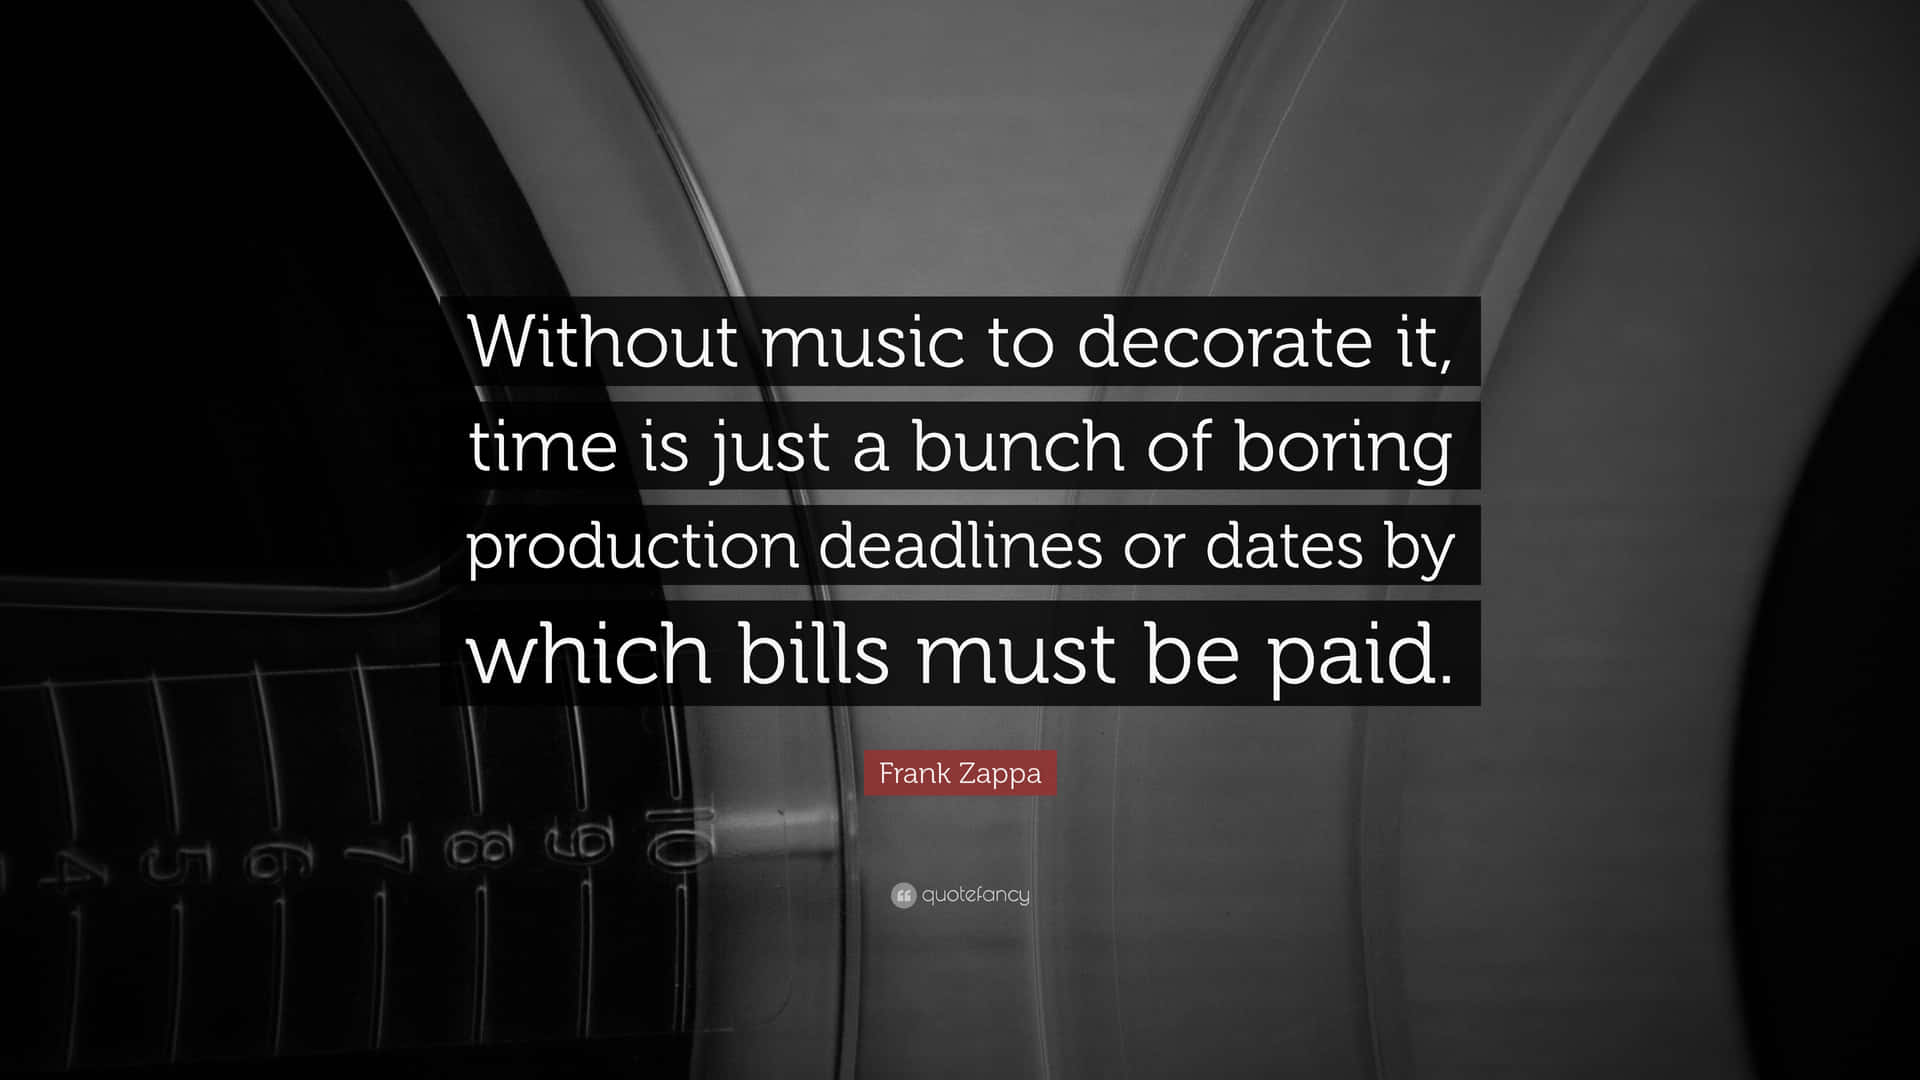 A Quote About Music Without Music To Decorate It Time Is Just A Bunch Of Boring Production Background